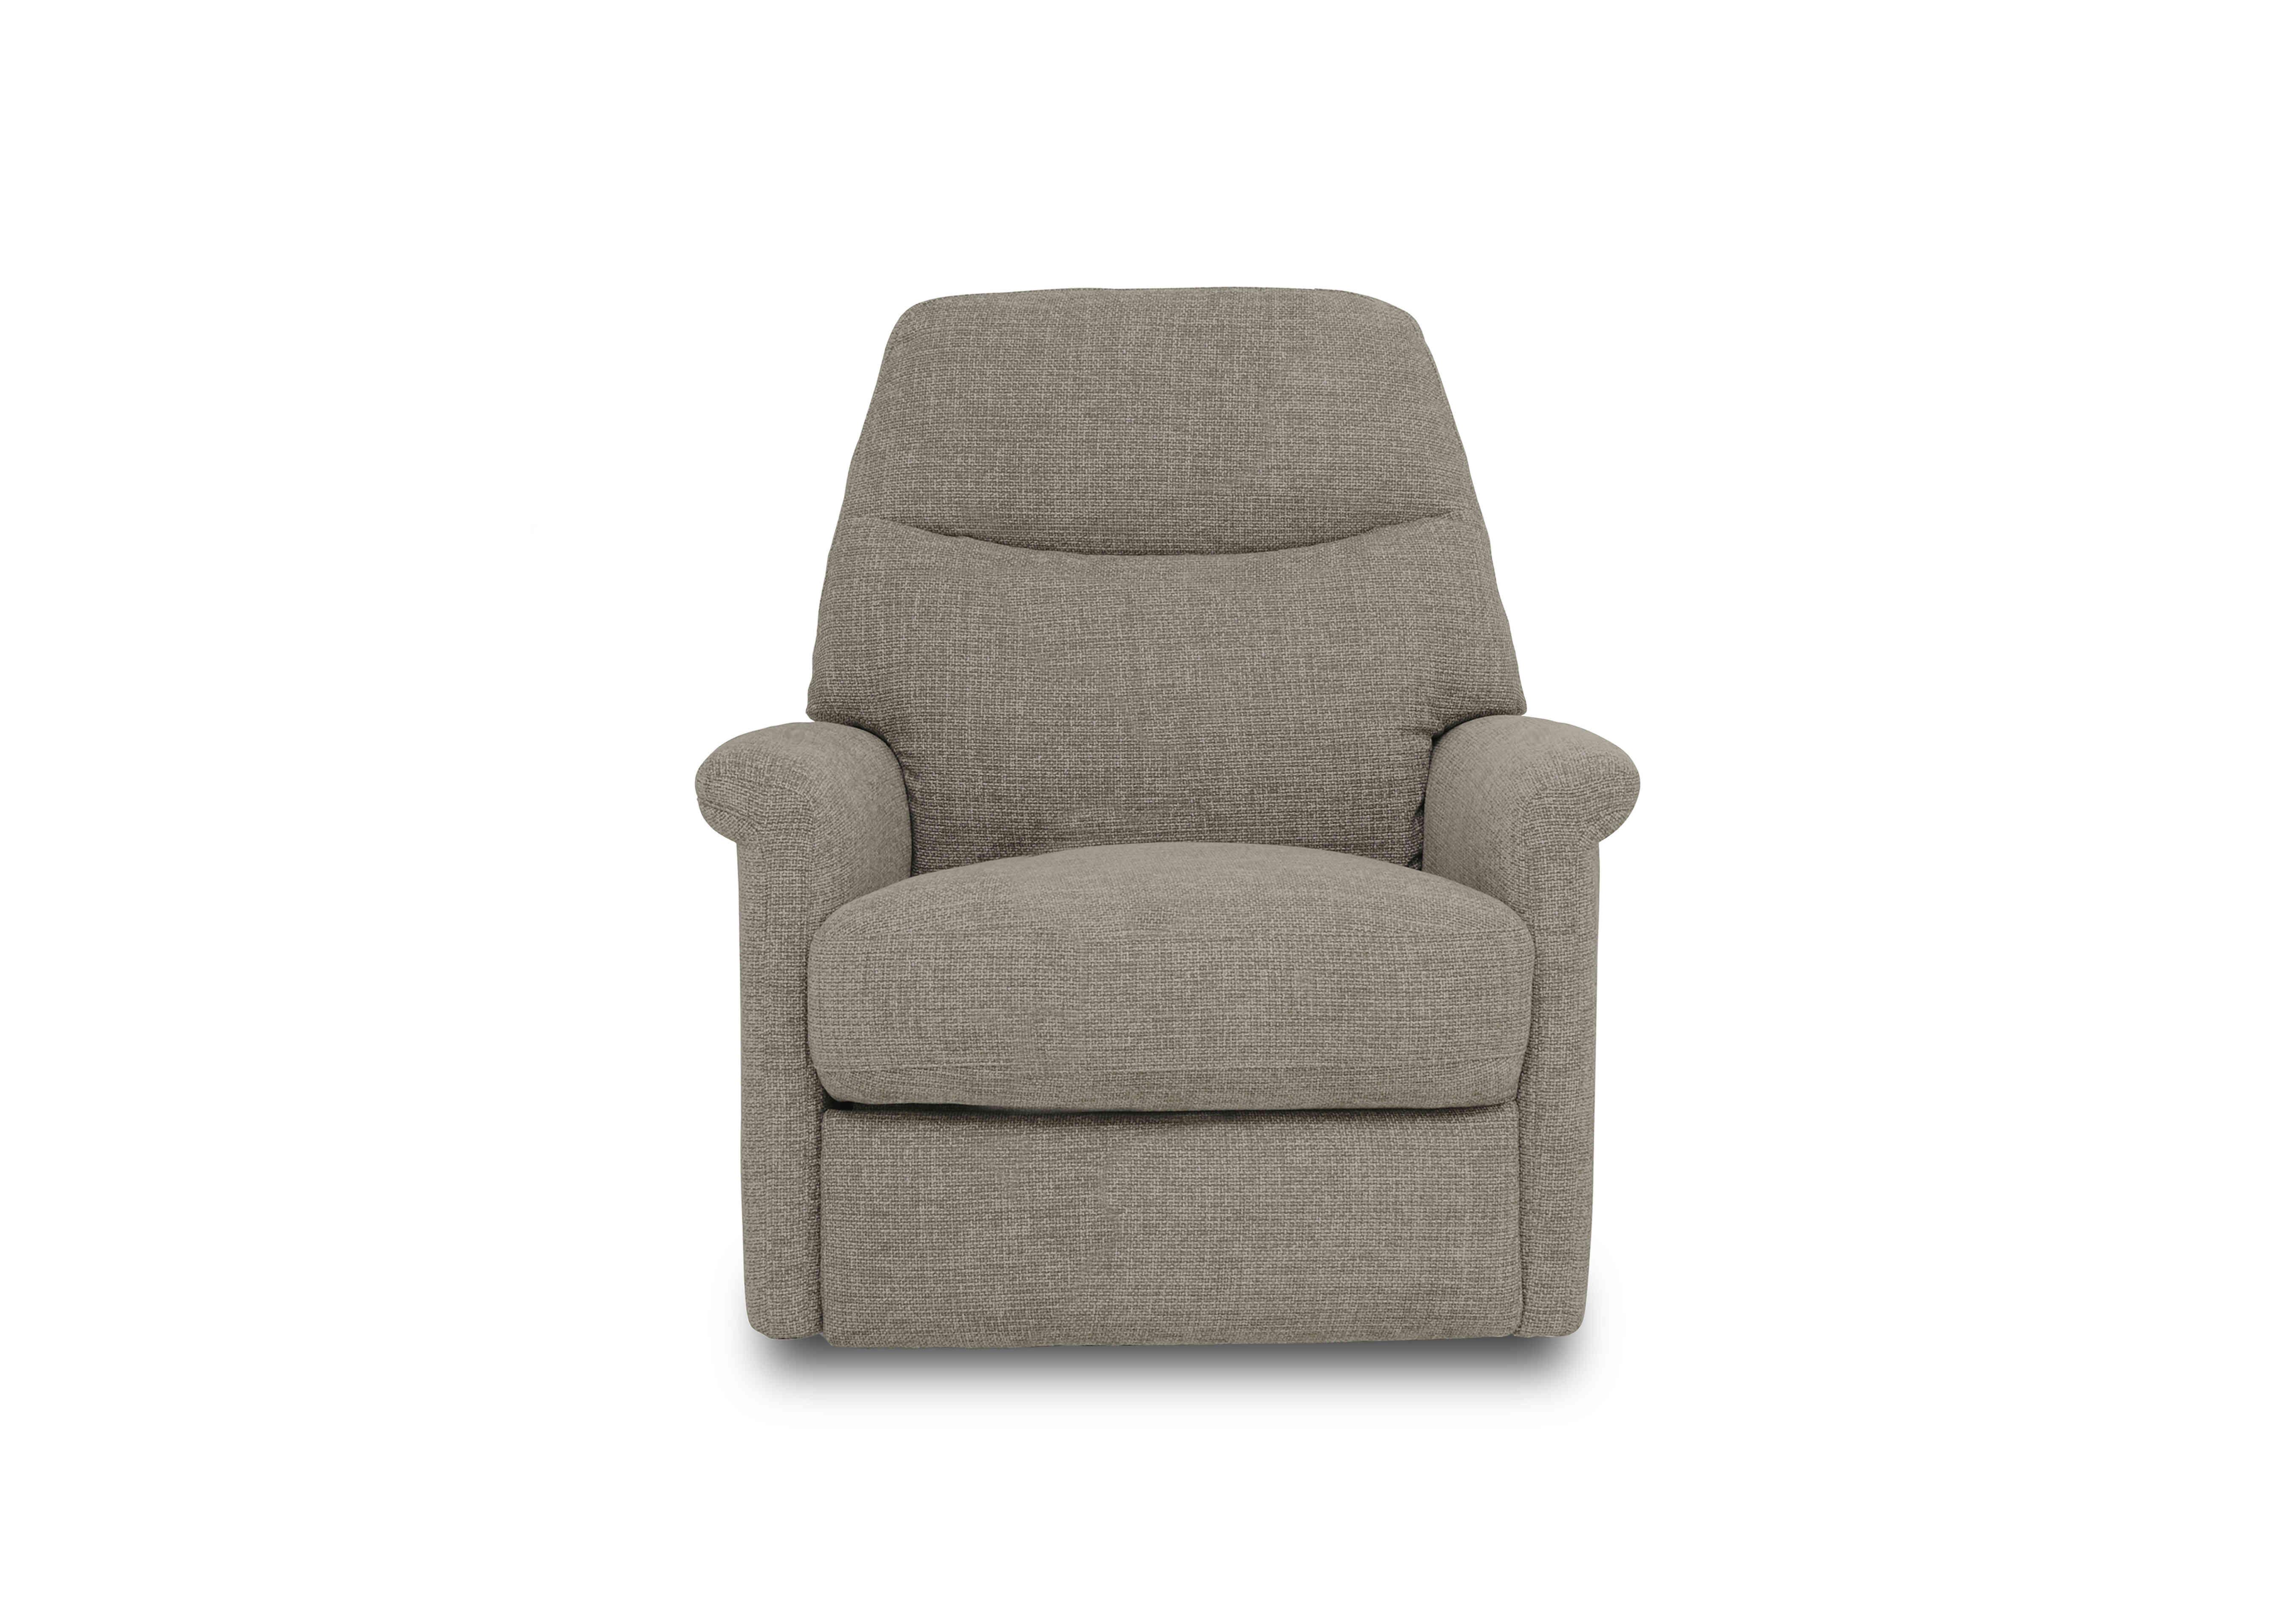 Compact Collection Lille Fabric Chair in Fab-Cac-R120 Sand on Furniture Village